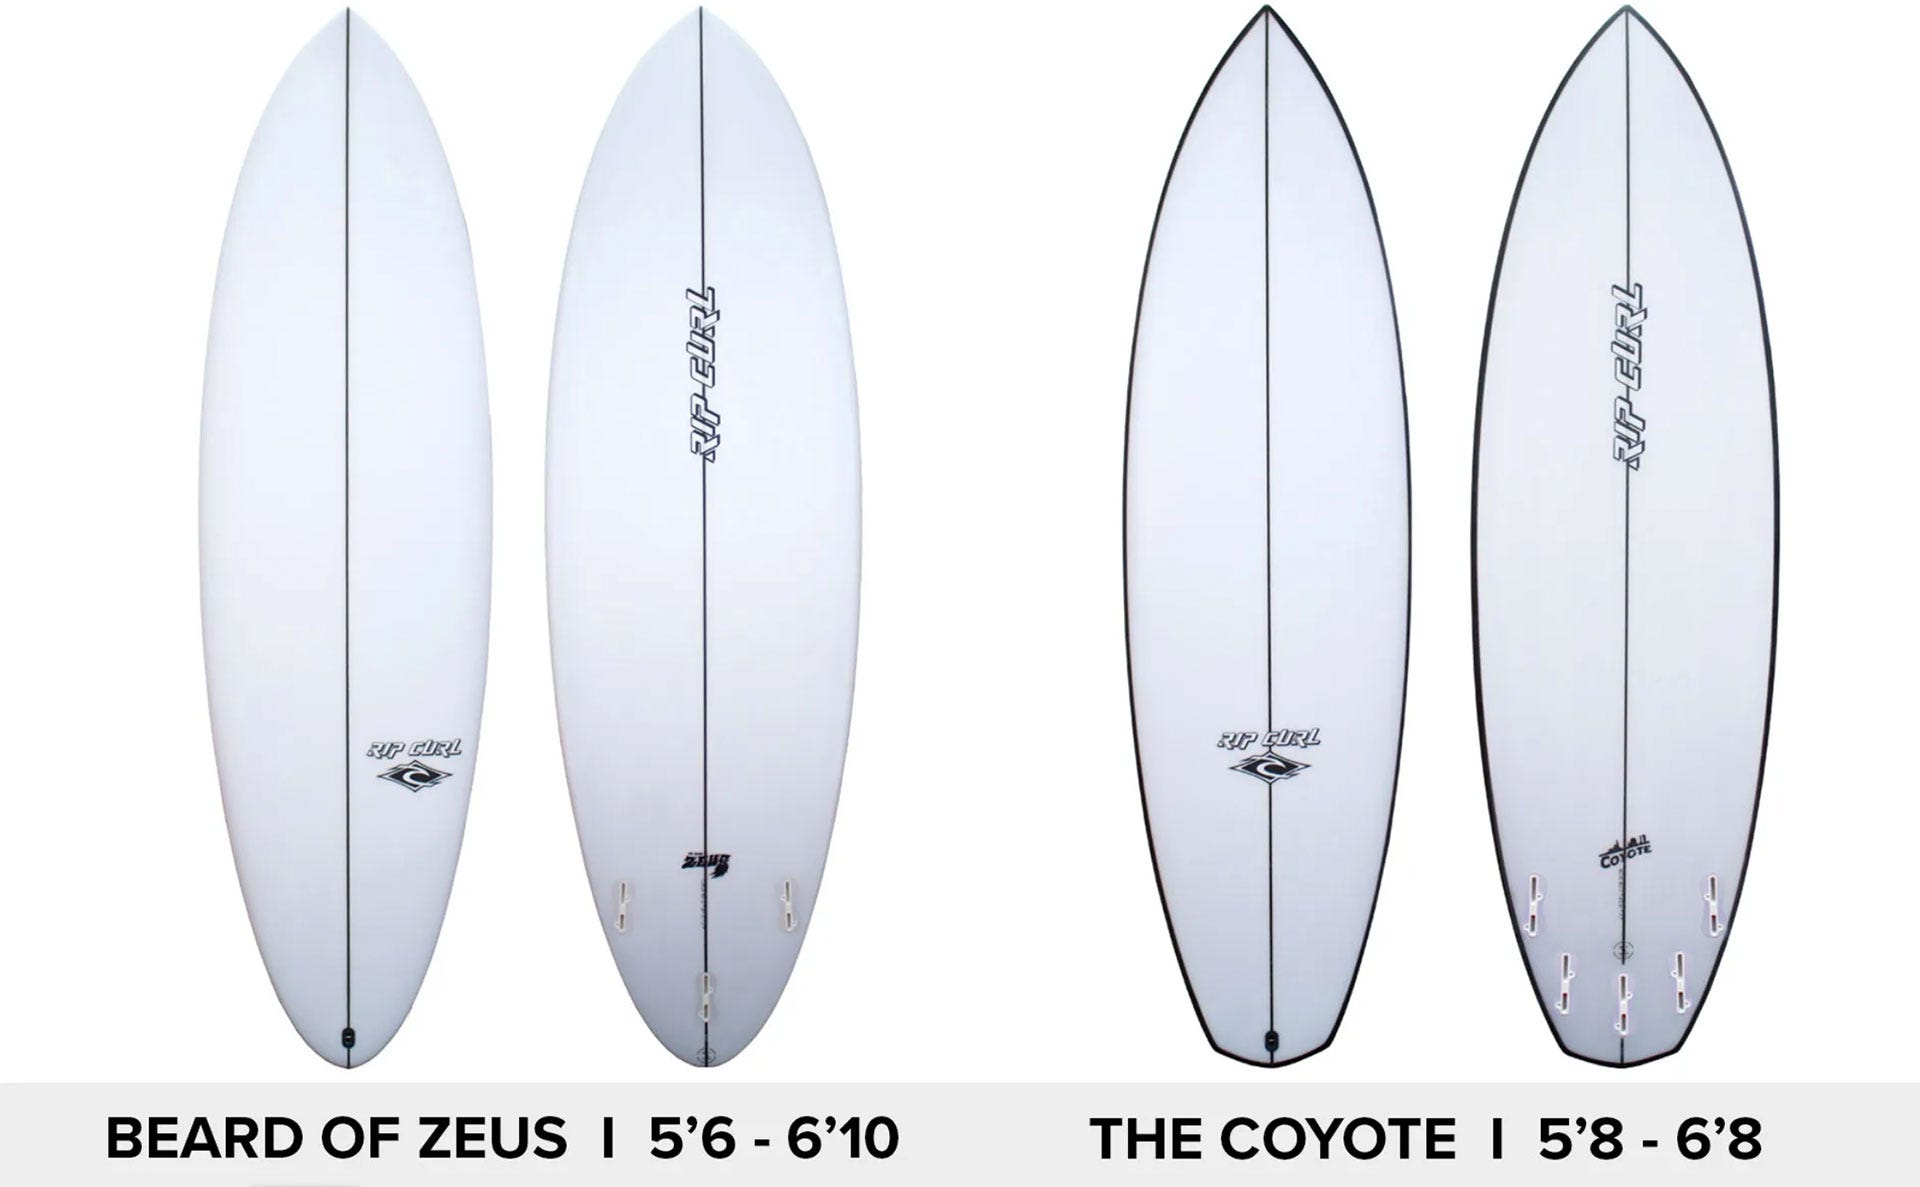 Rip Curl Fun-Performace Surfboard - Beard of Zeus and The Coyote